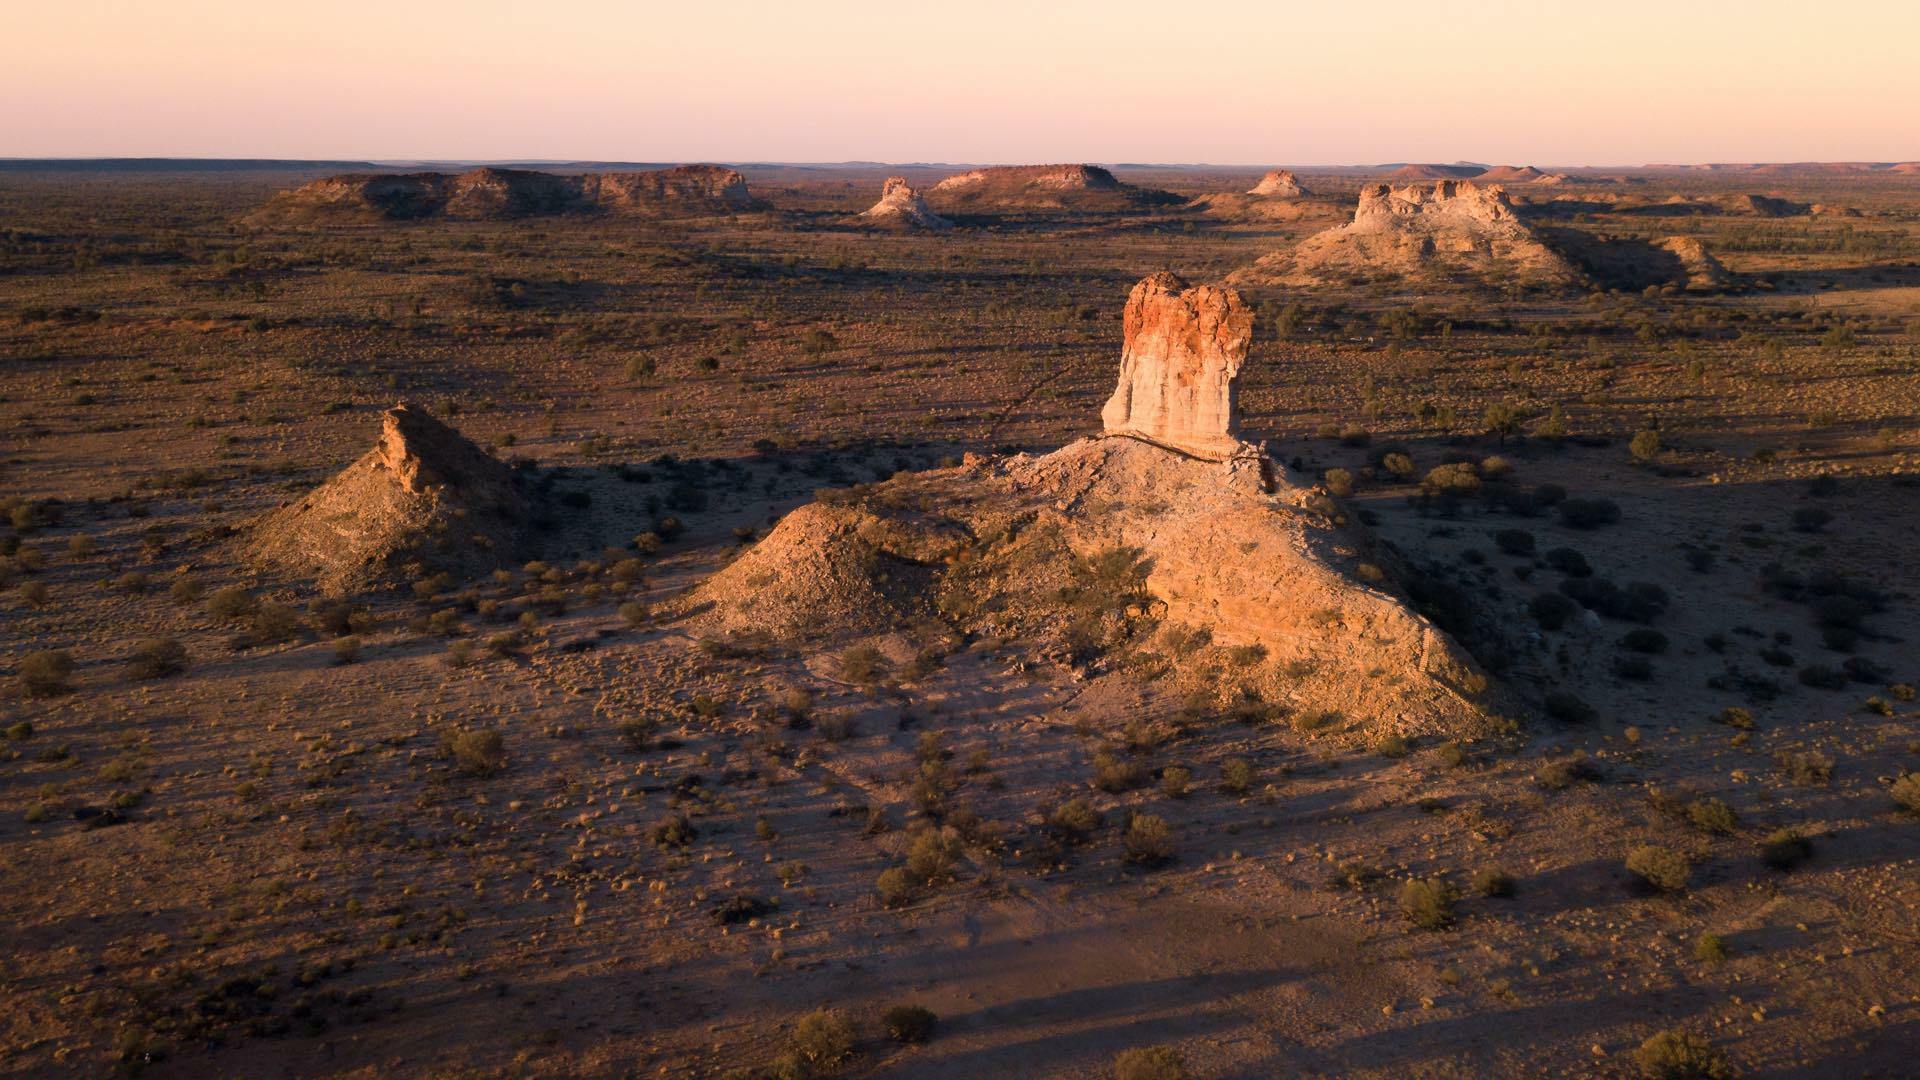 Outback Camping at Chambers Pillar, Conor Moore, desert, drone shot, sunset, rocks, pillars